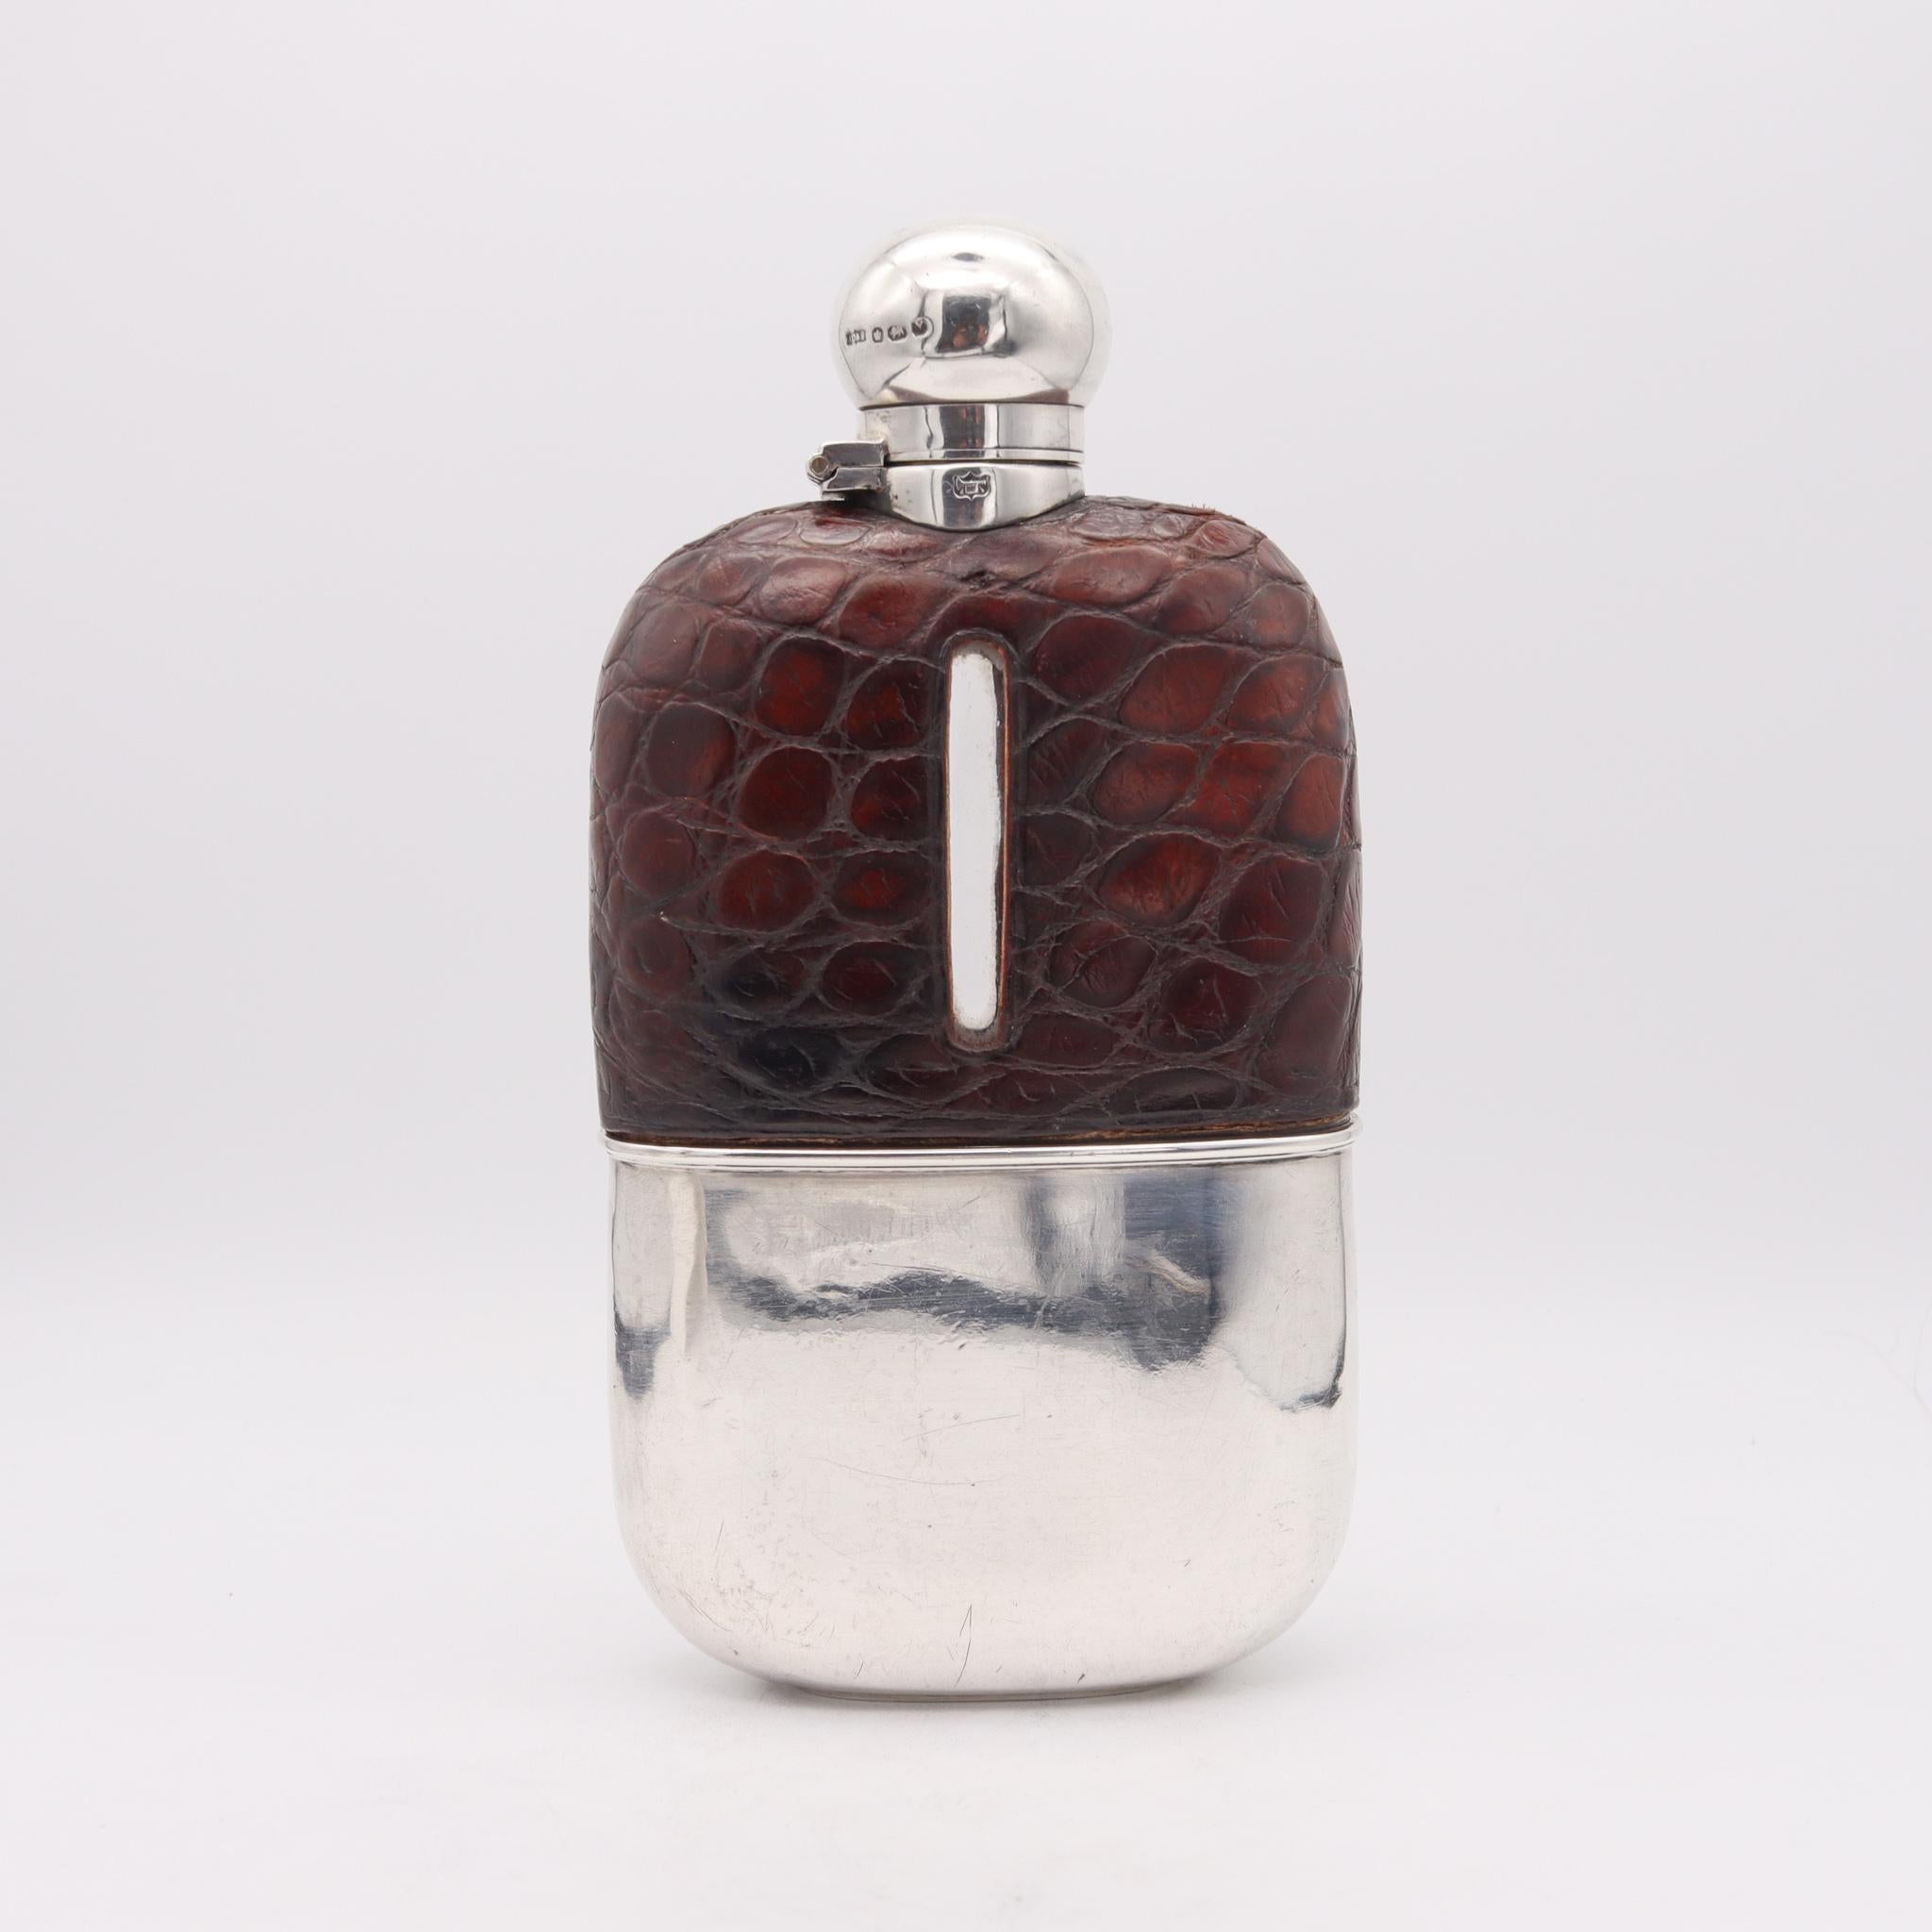 Liquor flask bottle designed by James Dixon & Sons.

Very handsome and handy liquor flask bottle, created in Sheffield England by the silversmith James Dixon & Sons, back in the 1891. This beautiful large liquor flask has been crafted in solid